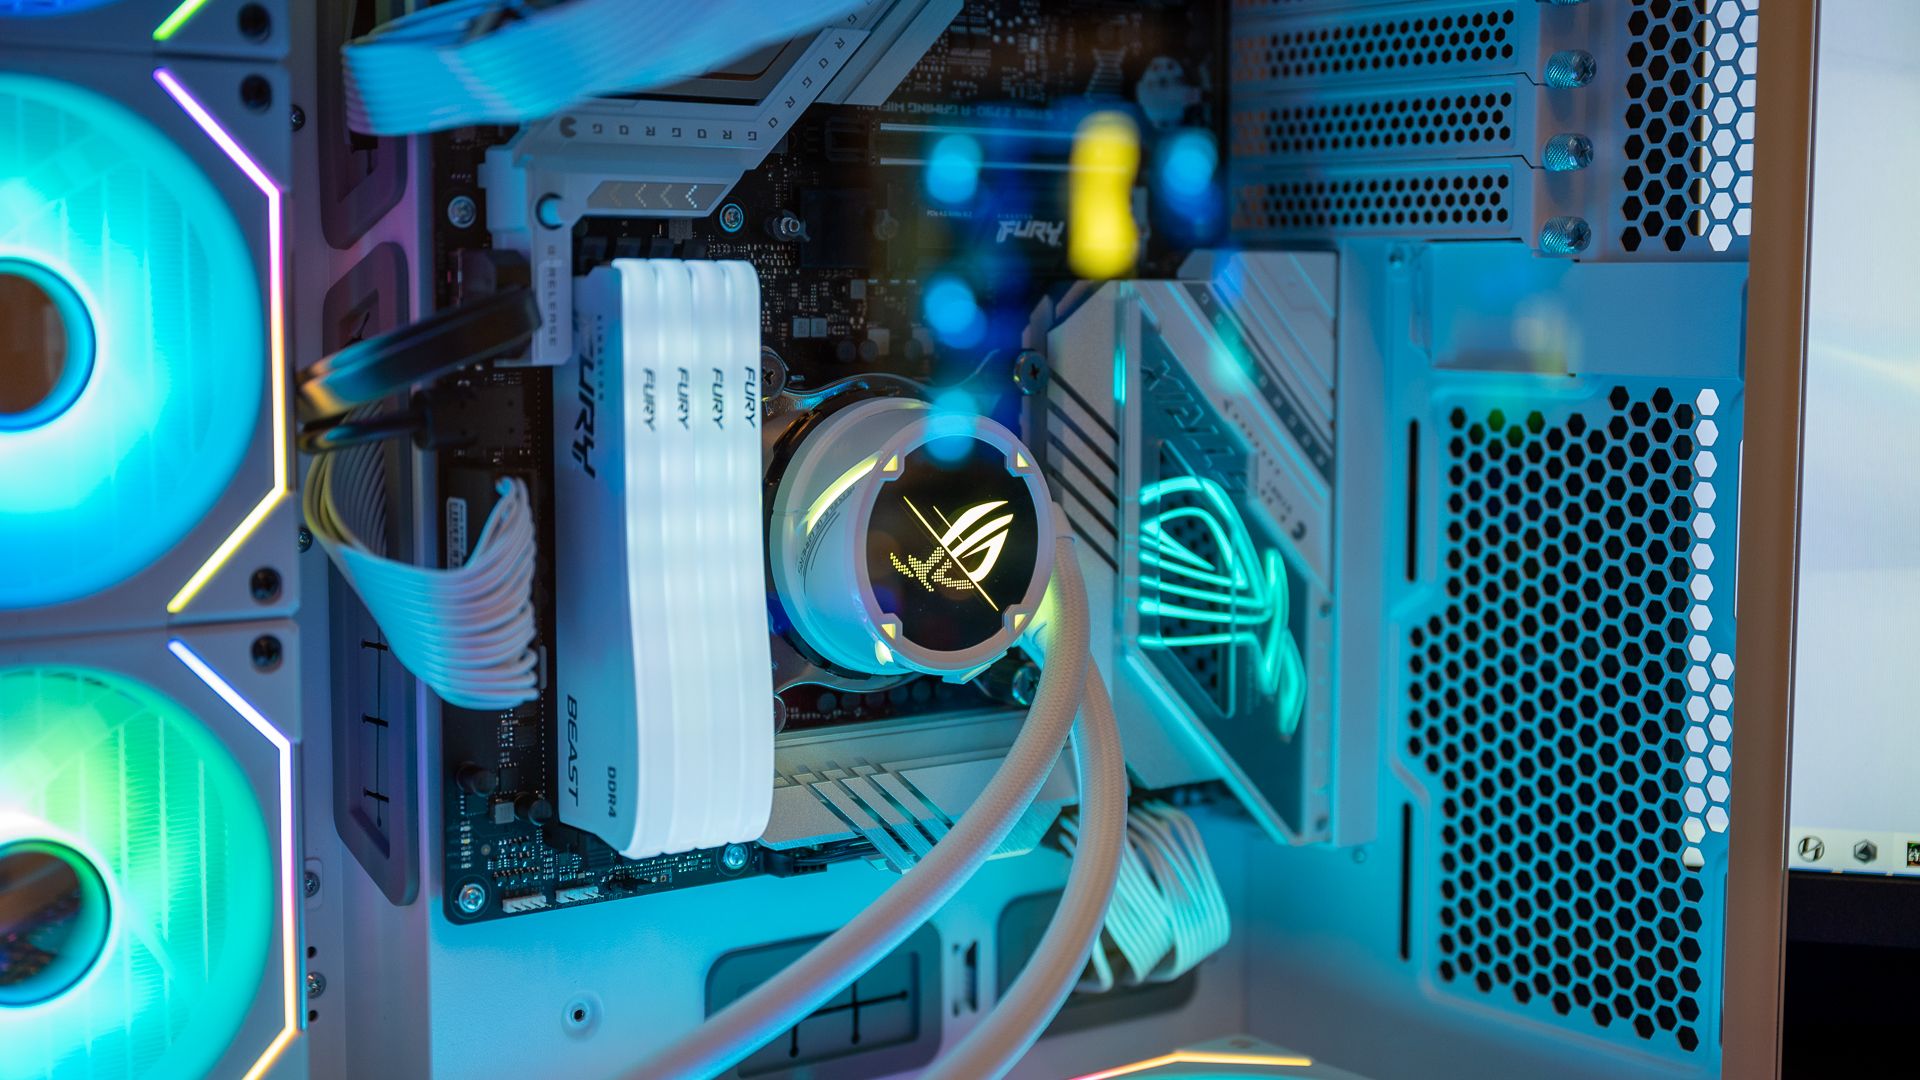 A gaming PC with an all-in-one liquid cooler and soft blue-green lighting. 